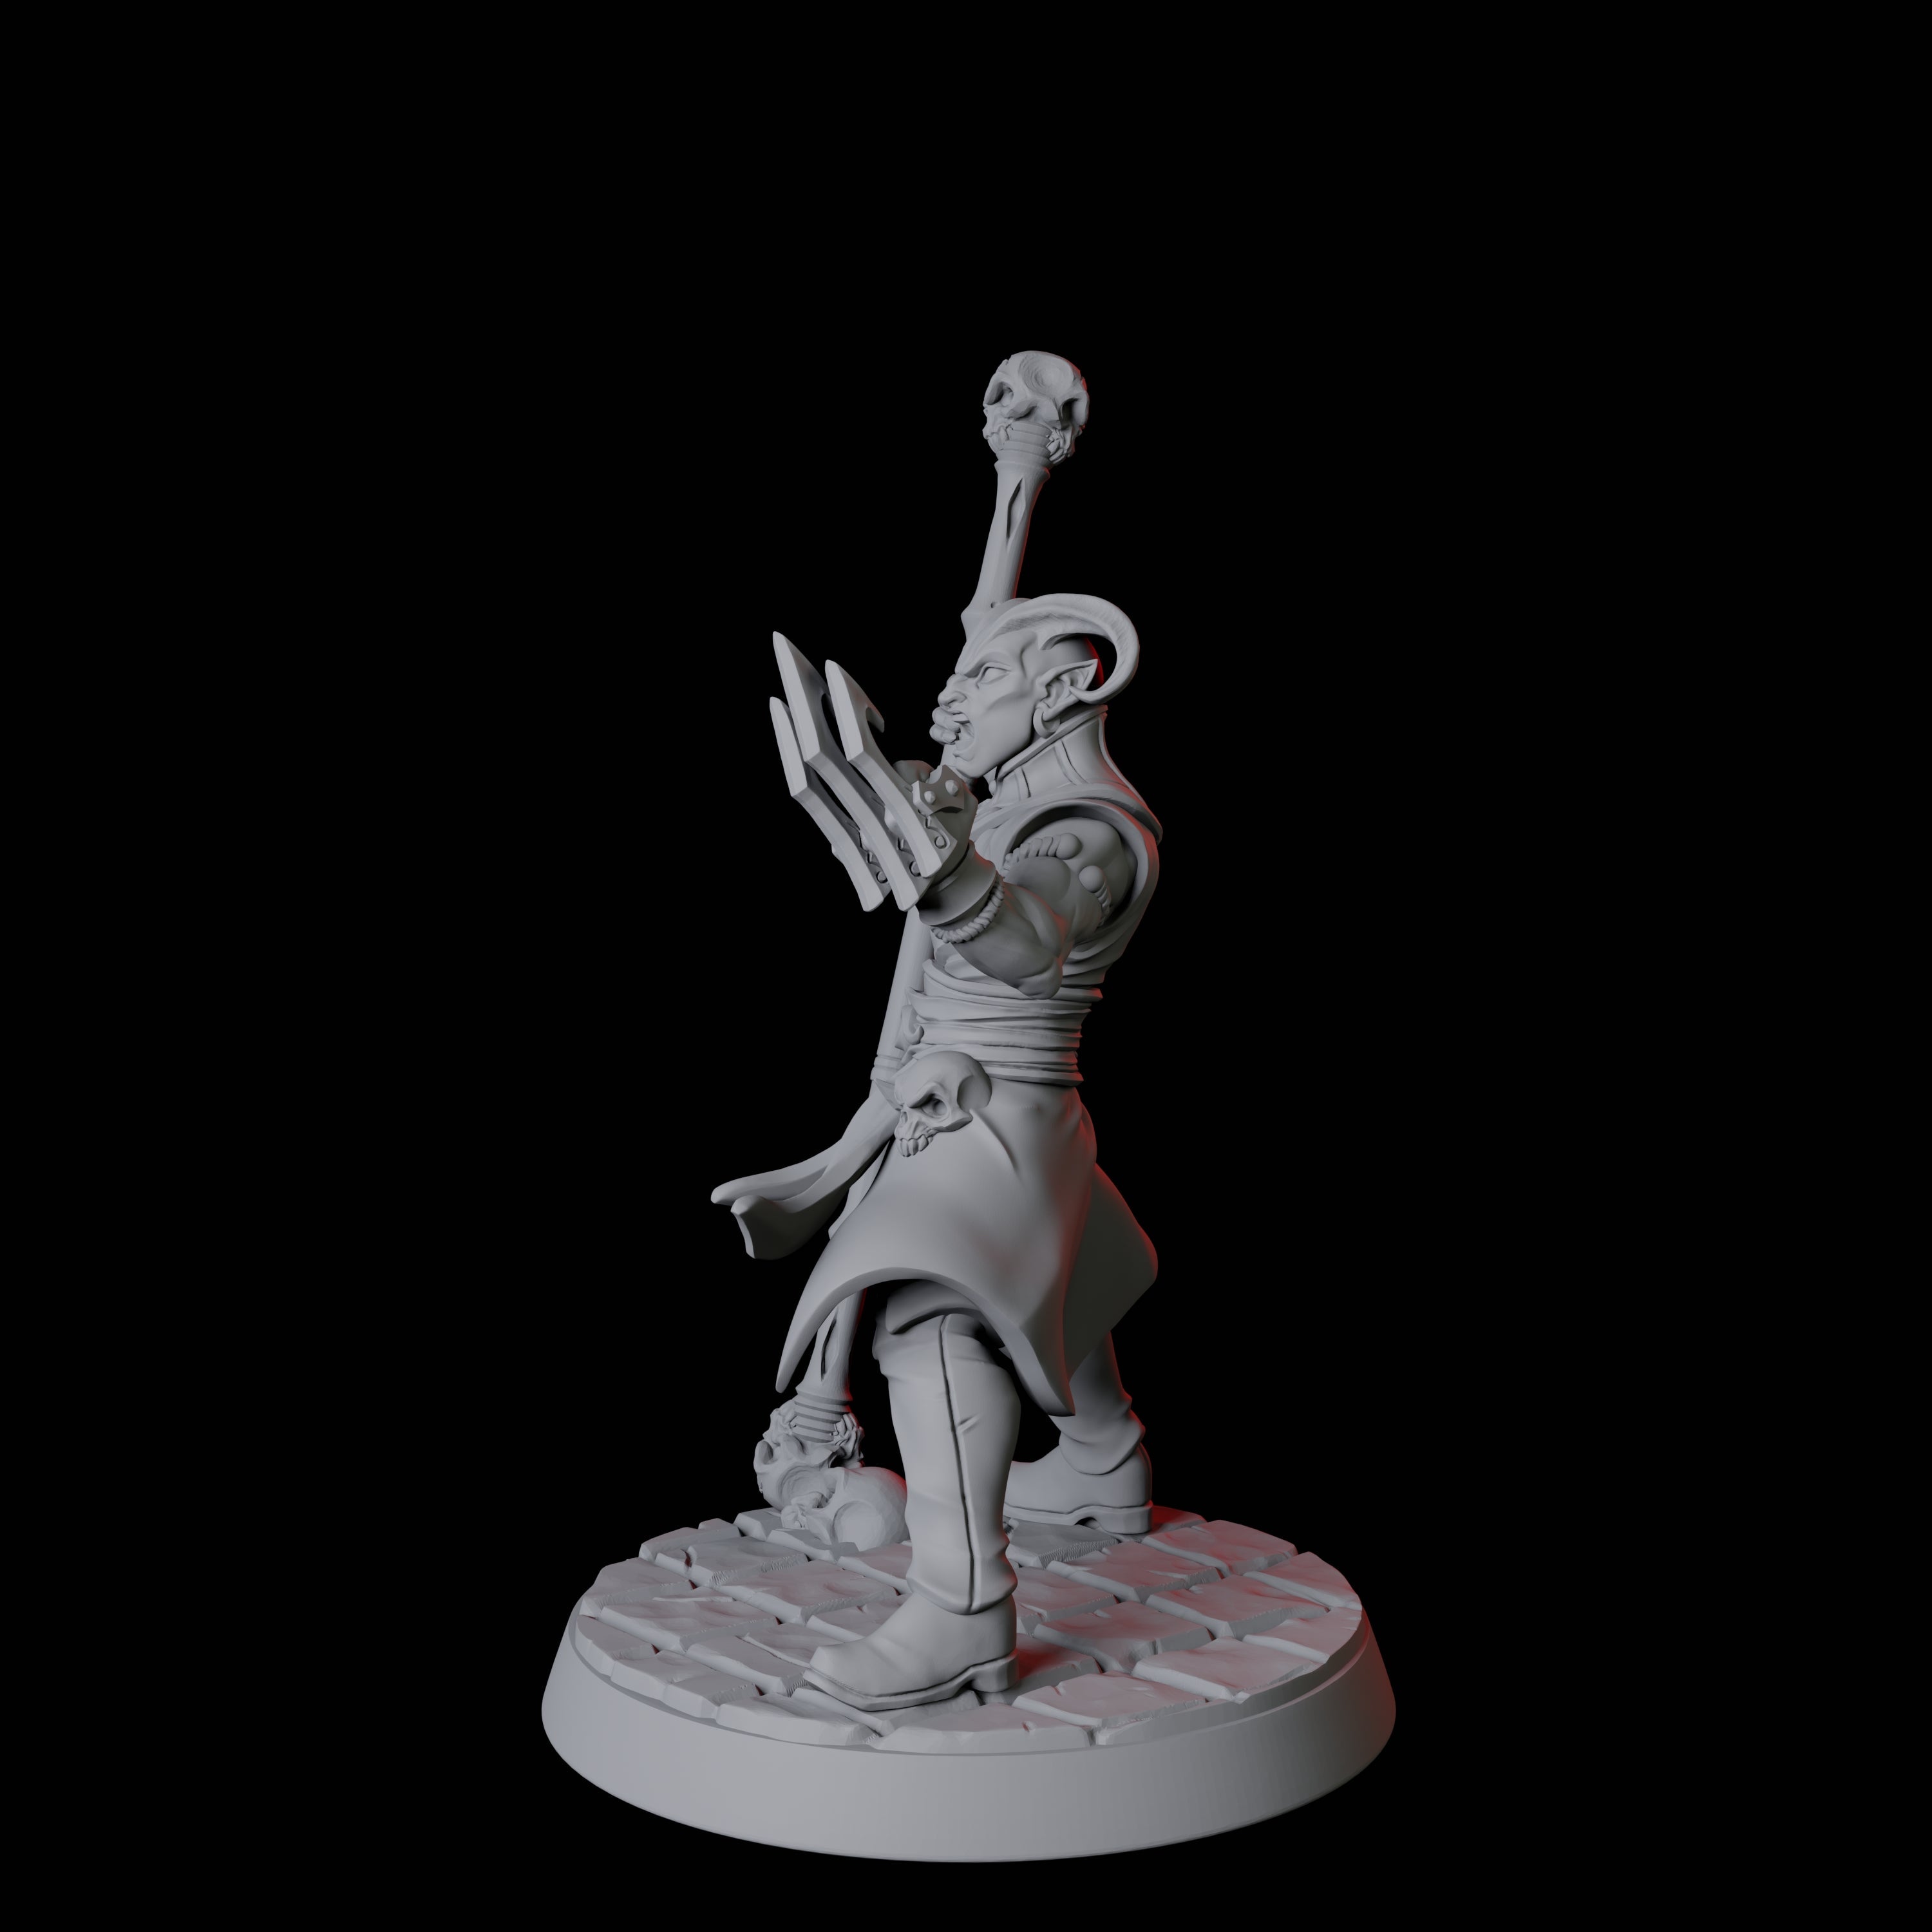 Tiefling Monk C Miniature for Dungeons and Dragons, Pathfinder or other TTRPGs